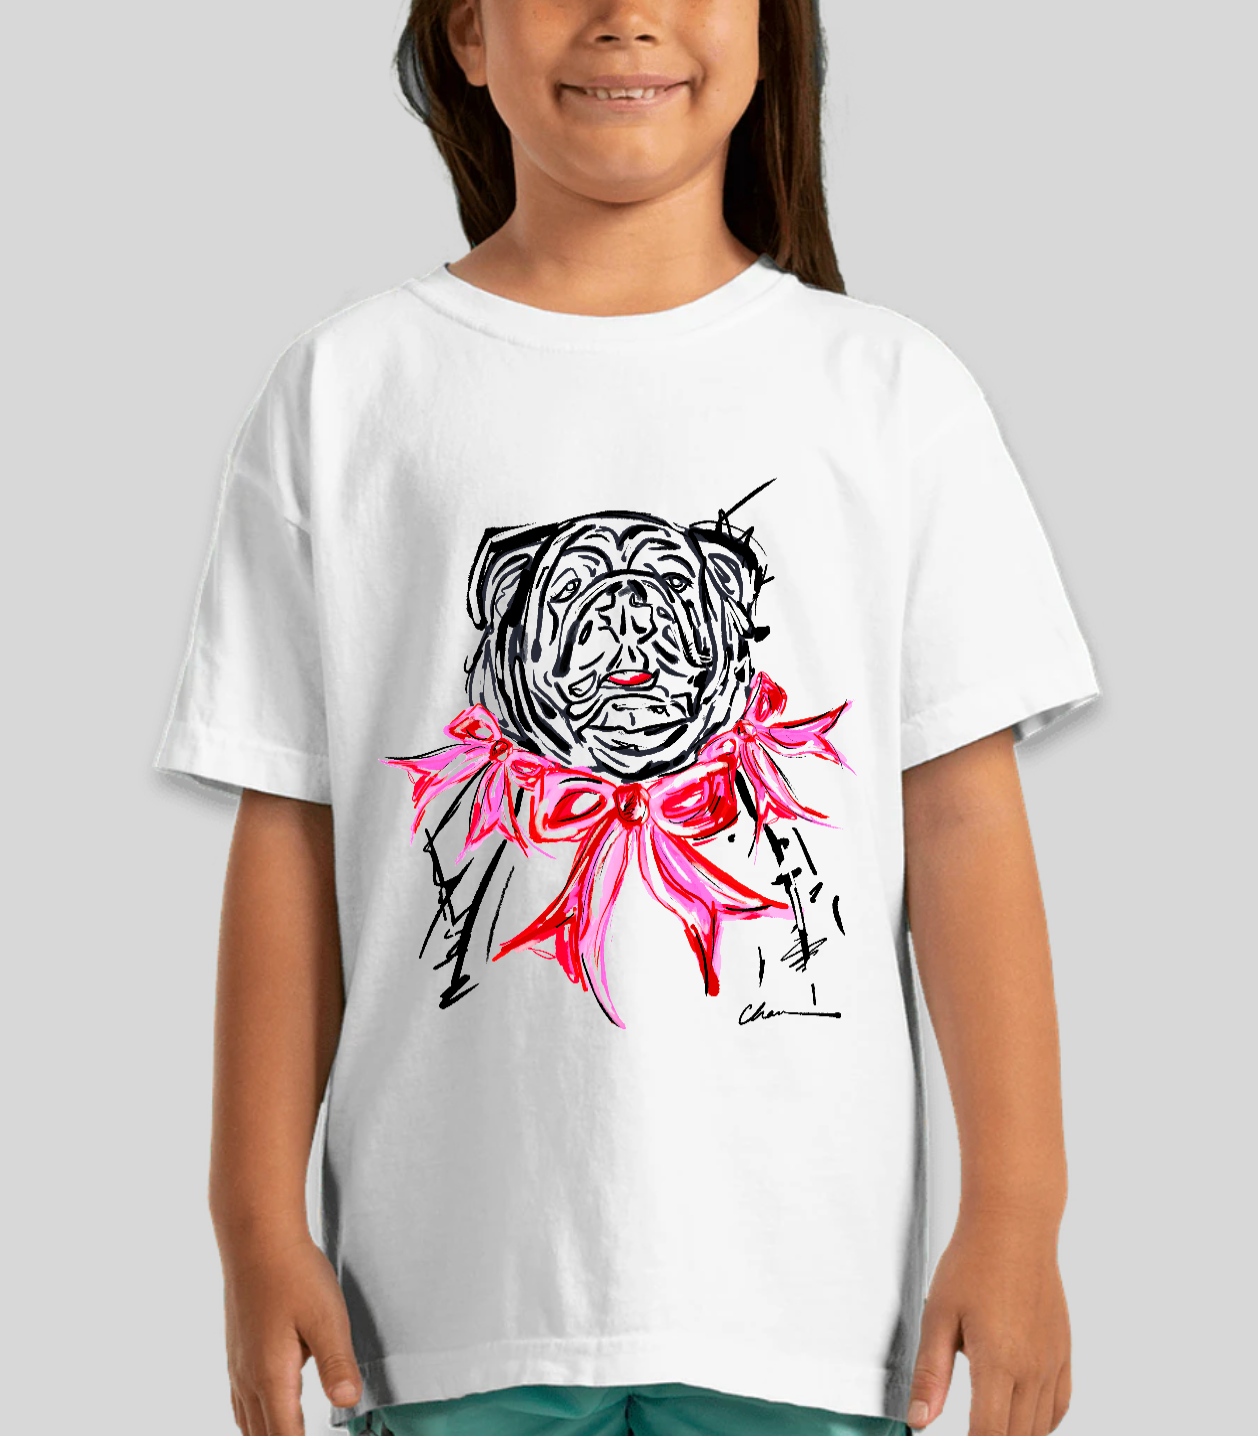 Bulldawg in Bows Youth T-shirt